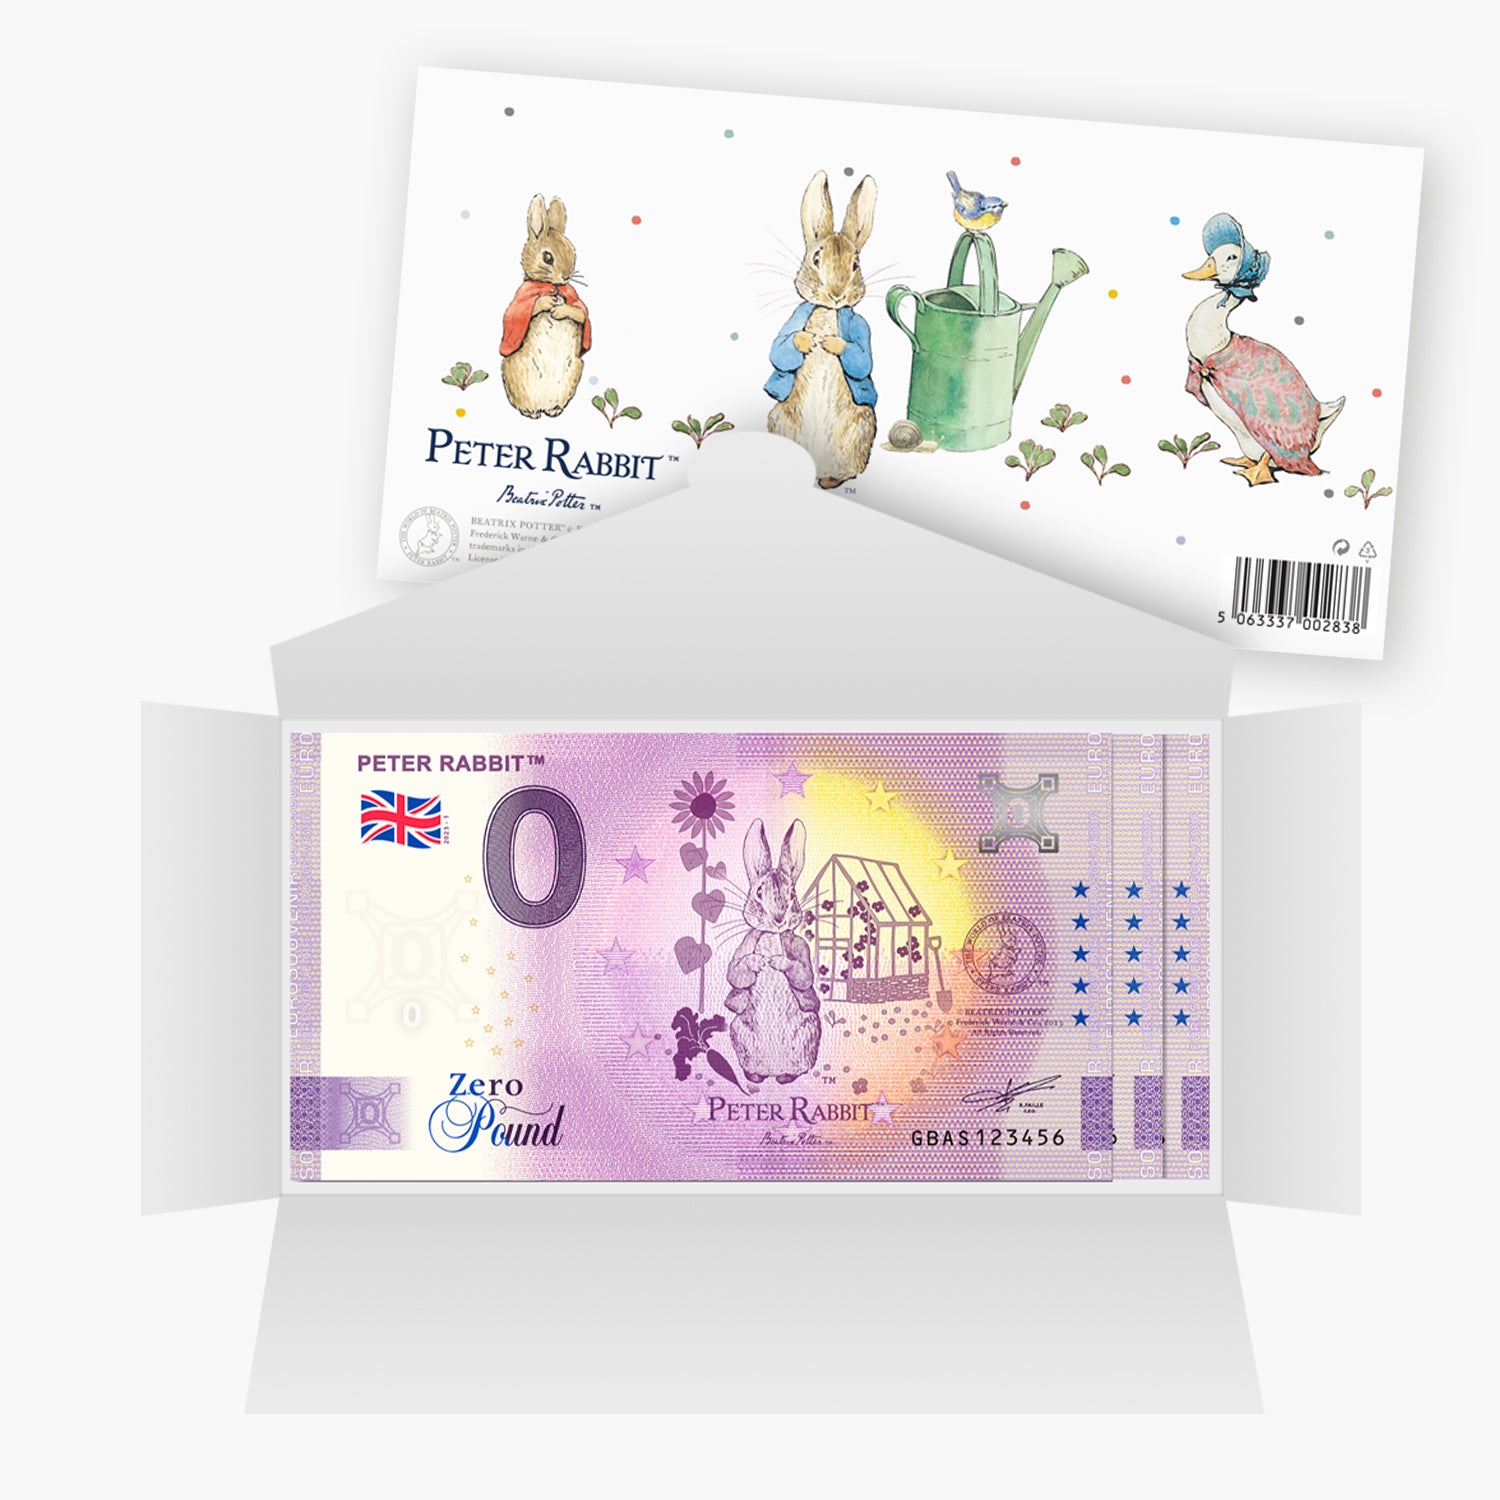 The World of Peter Rabbit £0 Banknote Set